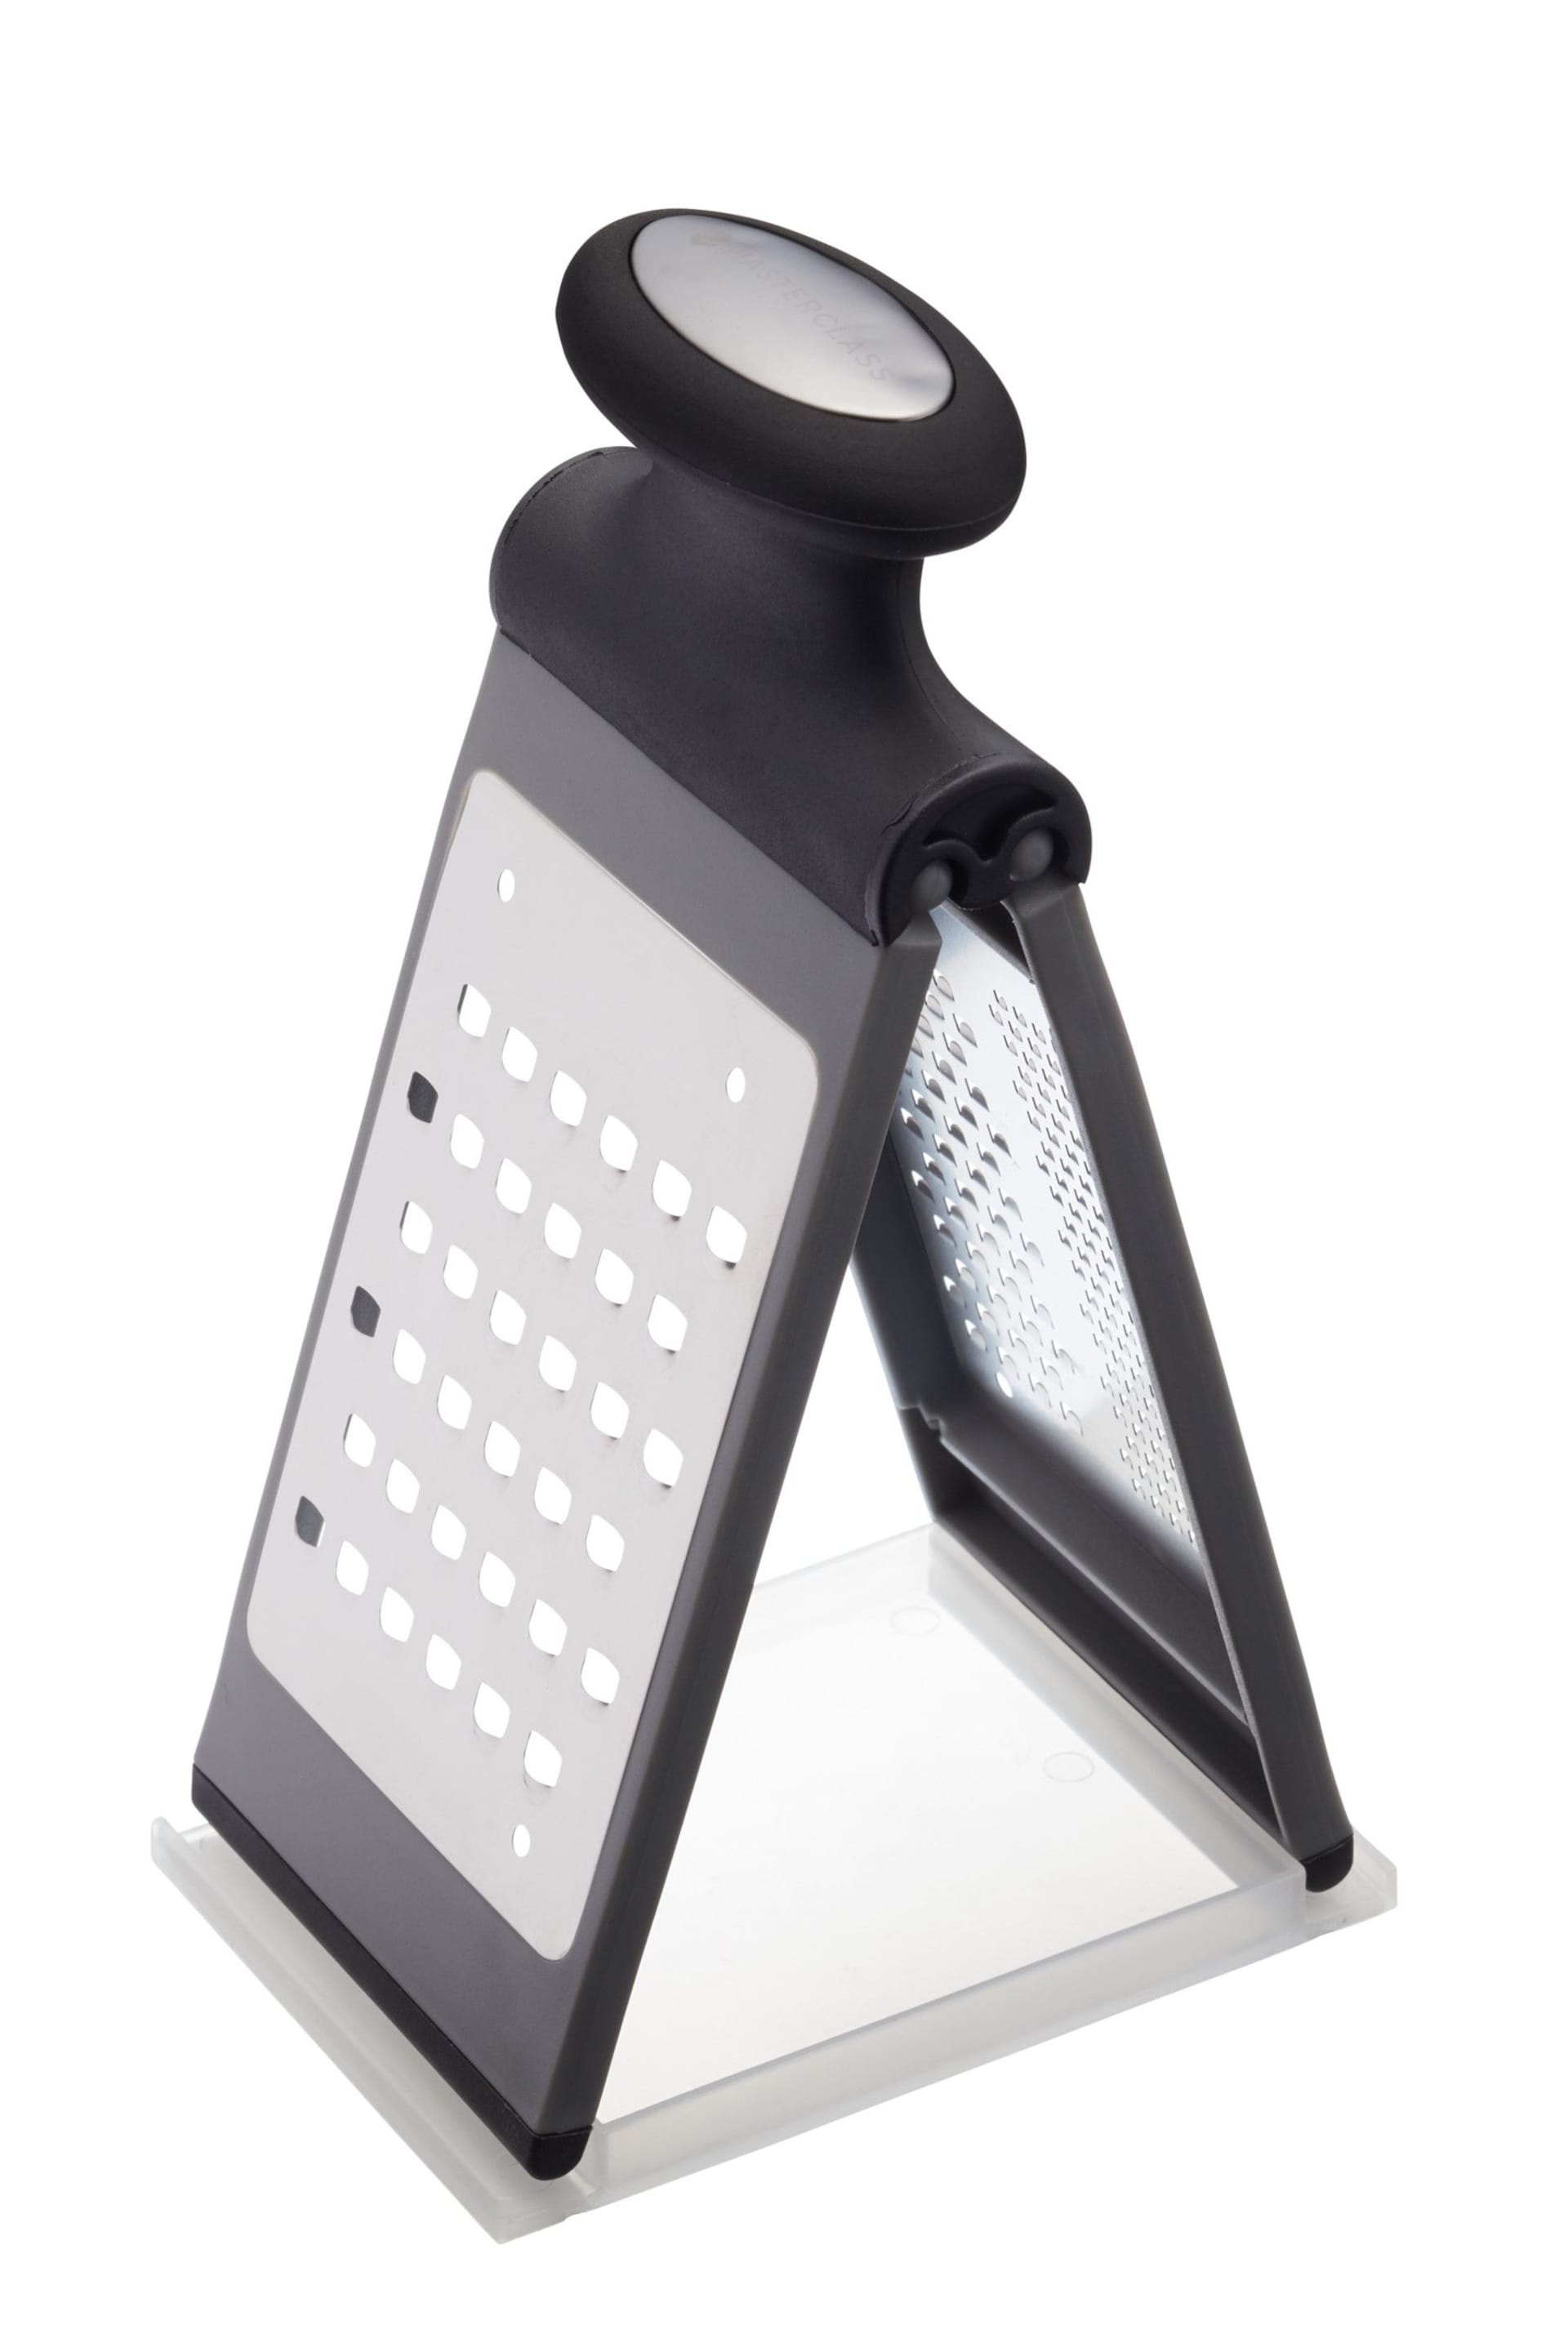 Masterclass Silver Smart Space Compact Vegetable Grater - Image 1 of 1